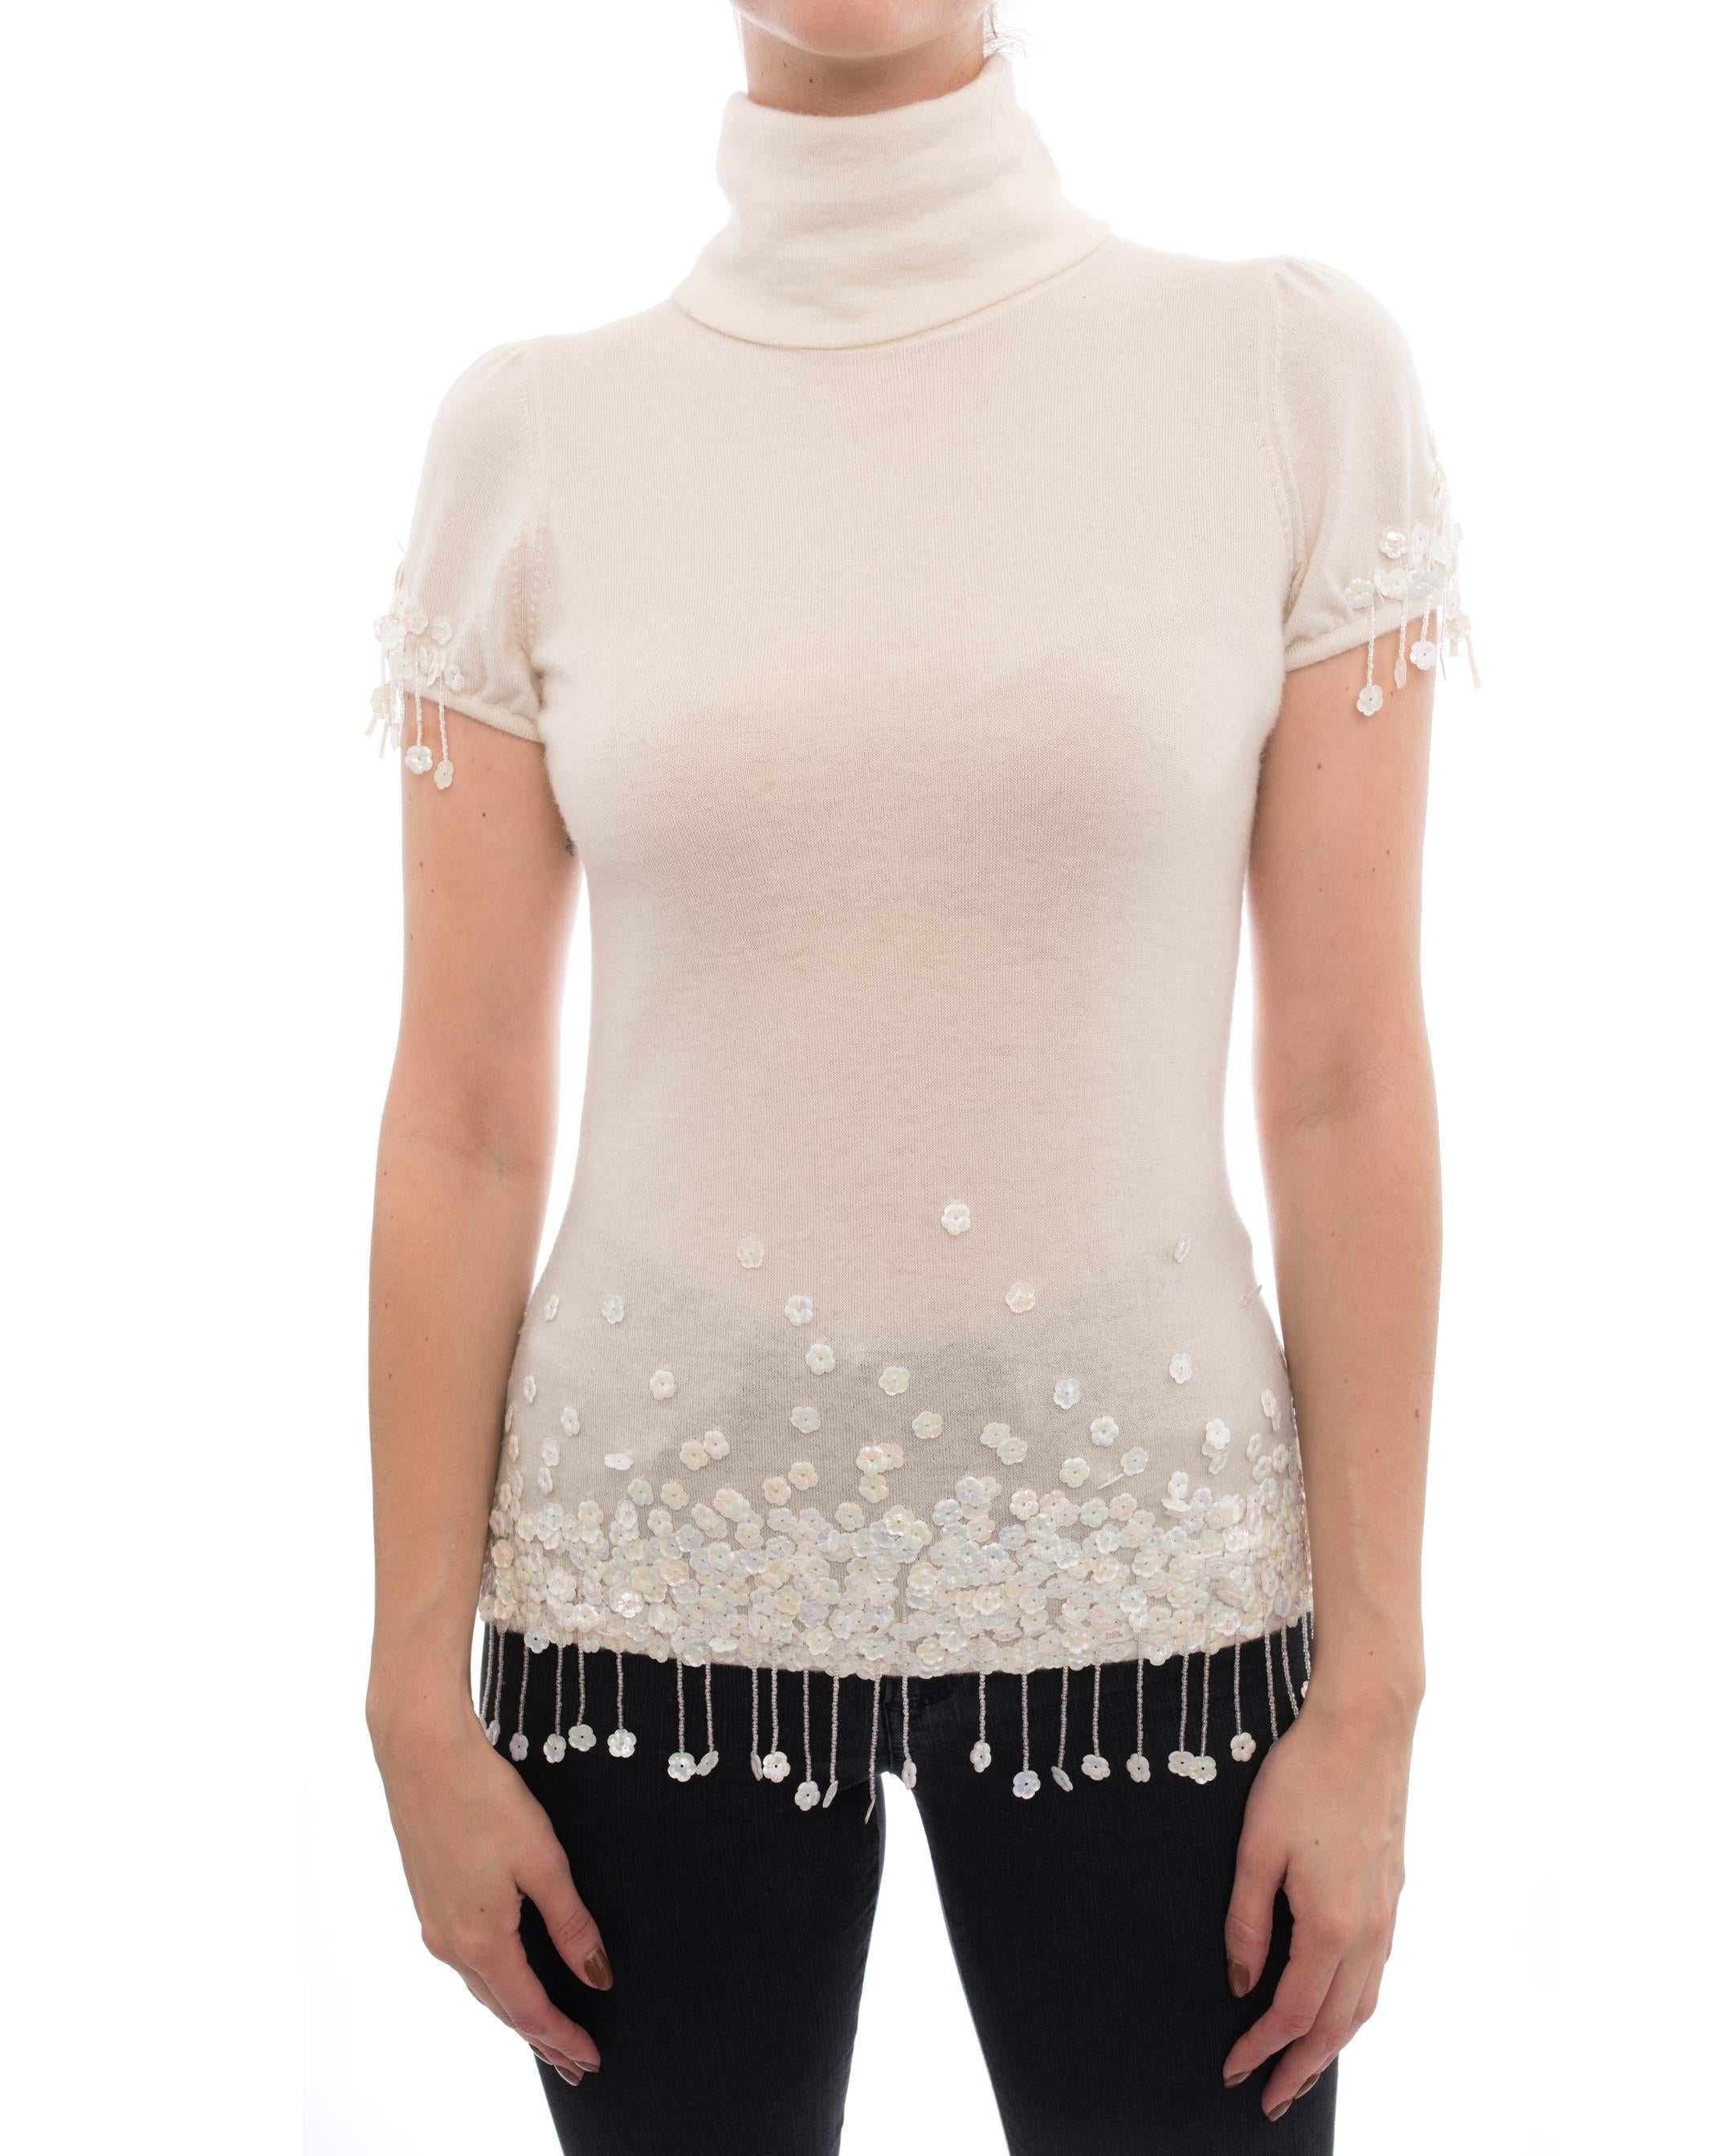 Chanel 04A Ivory Cashmere Knit Top with Sequin Bead Fringe.  Black and white enamel buttons at back neck, high funnel neck, short cap sleeves, iridescent floral paillettes with seed beaded fringe. Marked size FR 38 (USA 6).  To fit 34” at bust, 15”